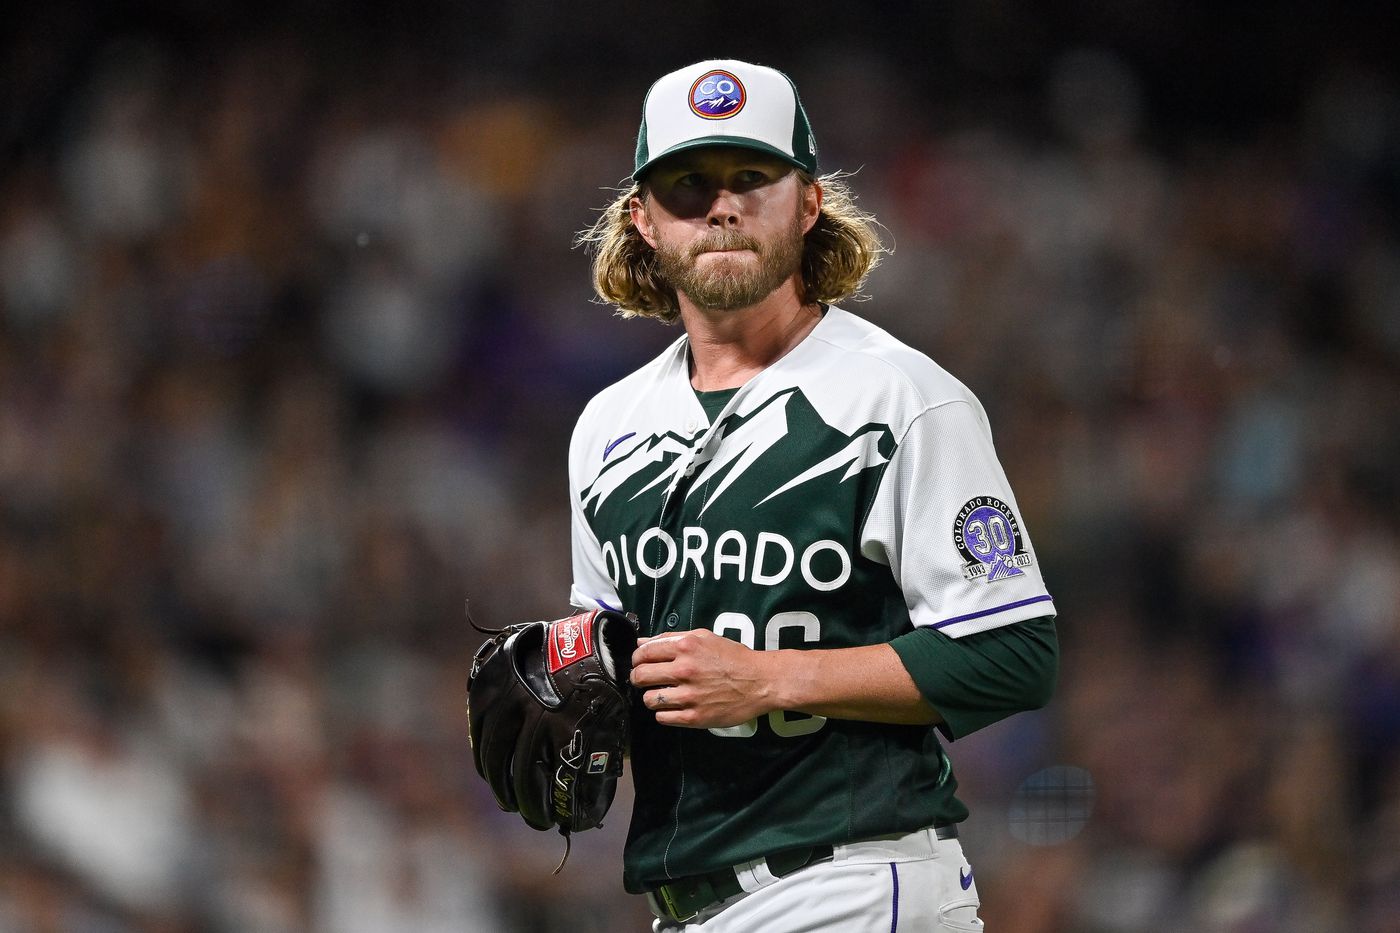 MLB trade deadline: The Atlanta Braves have acquired reliever Pierce Johnson from the Rockies, per report